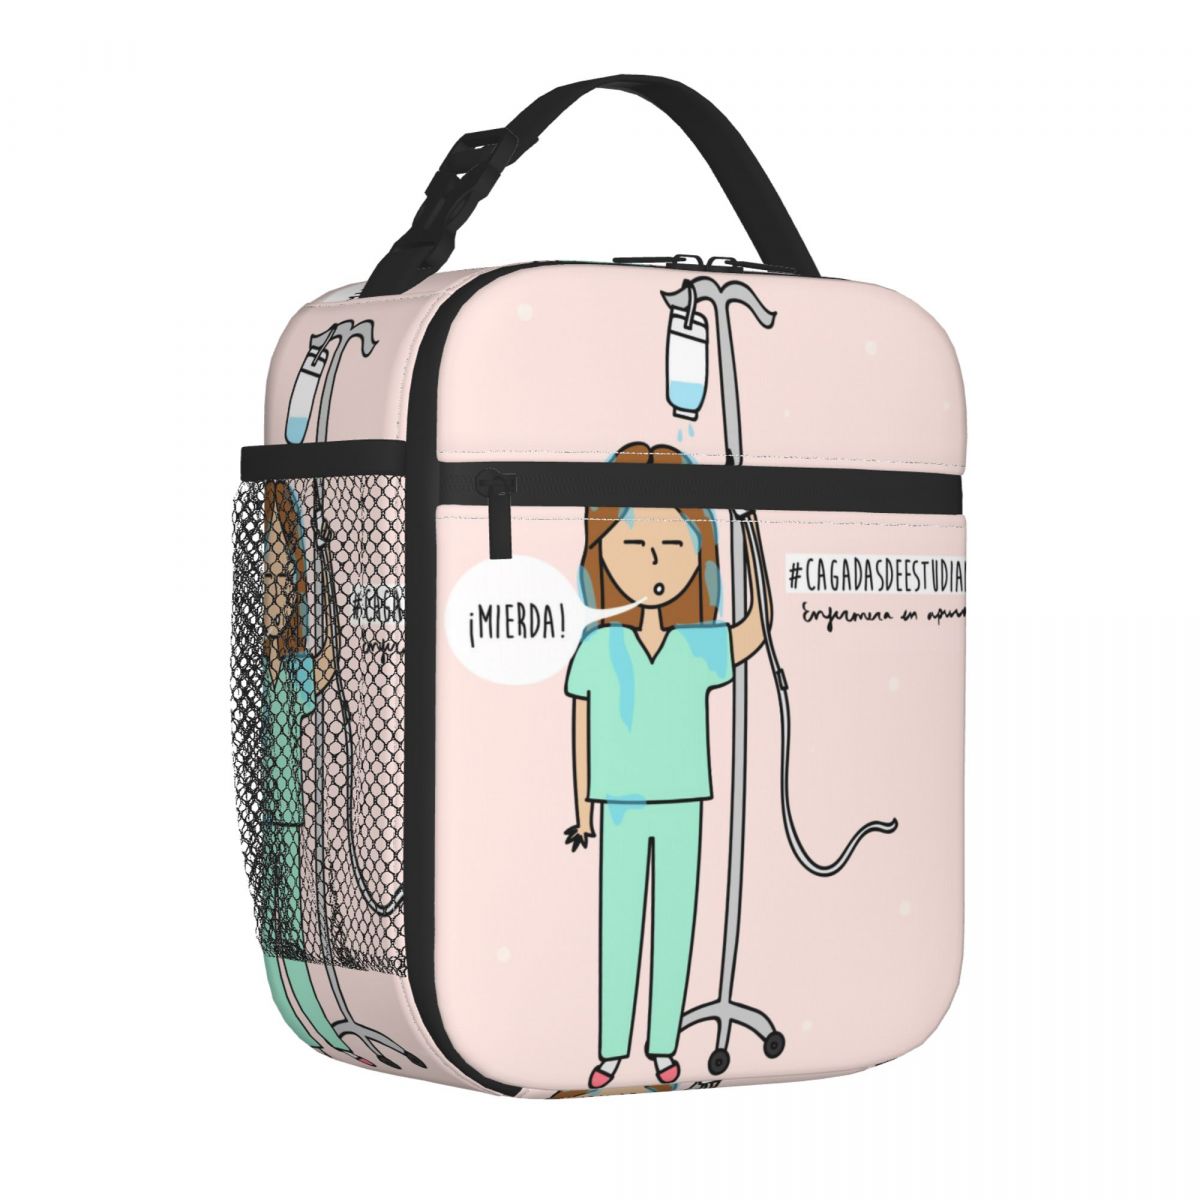 Sac isotherme infirmière repas | Lunch Box